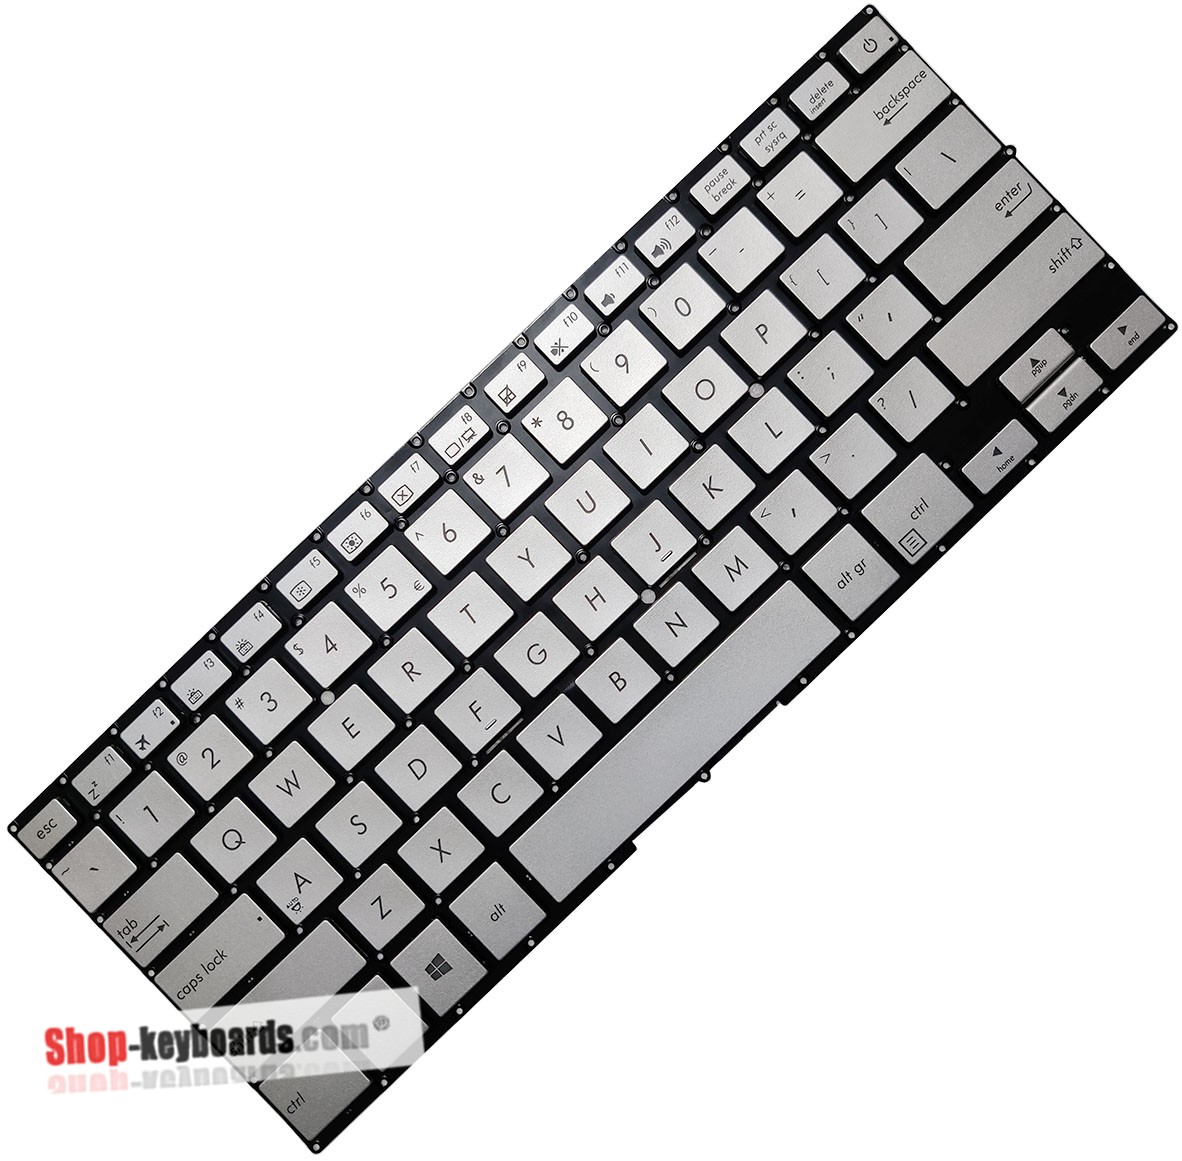 Asus 0KNB0-D620GE00 Keyboard replacement